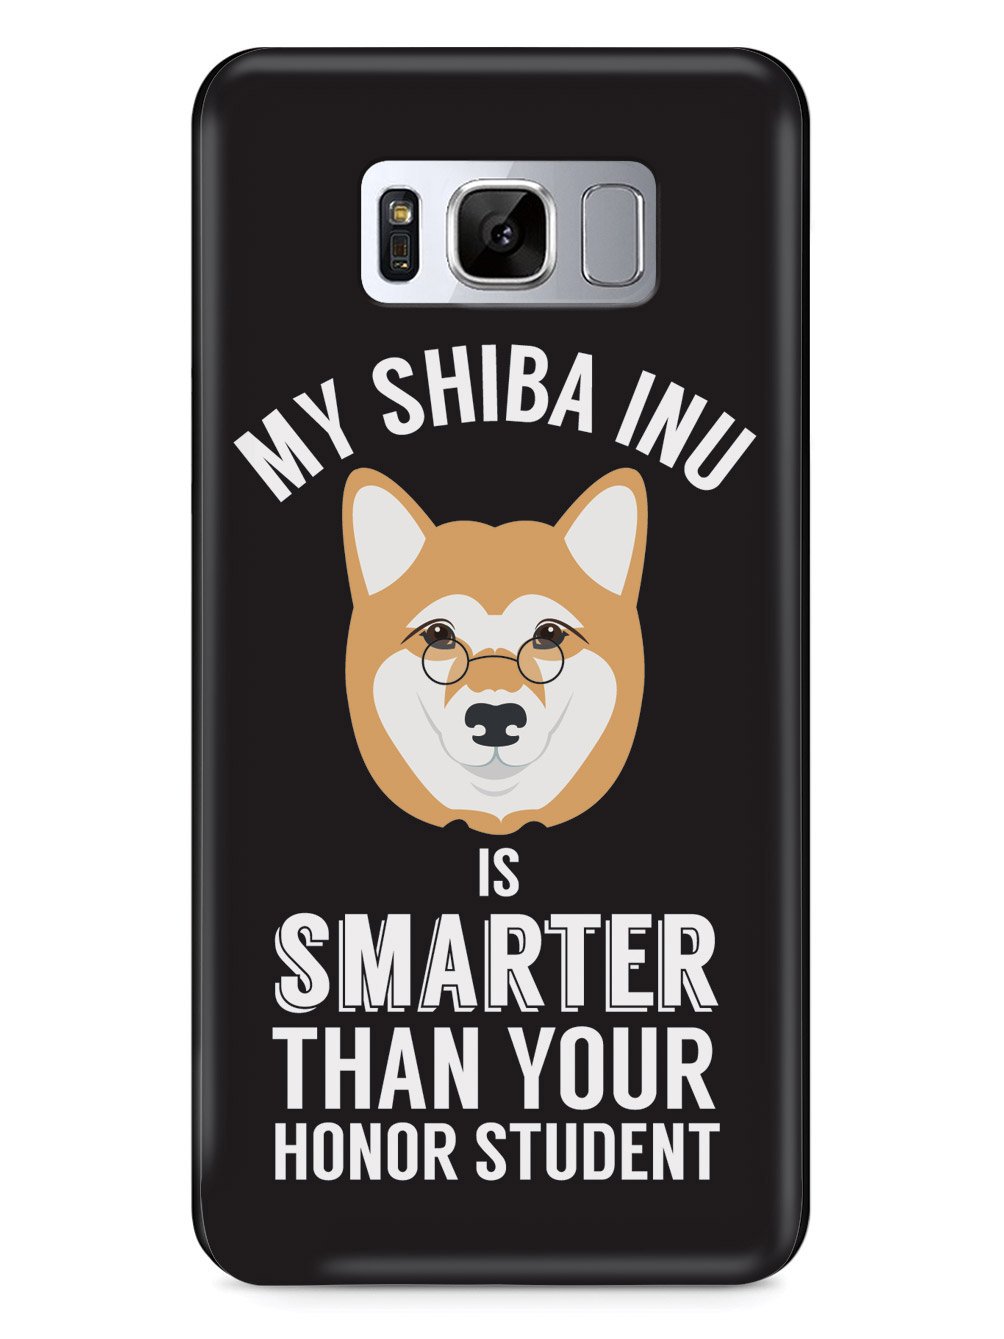 Smarter Than Your Honor Student - Shiba Inu Case